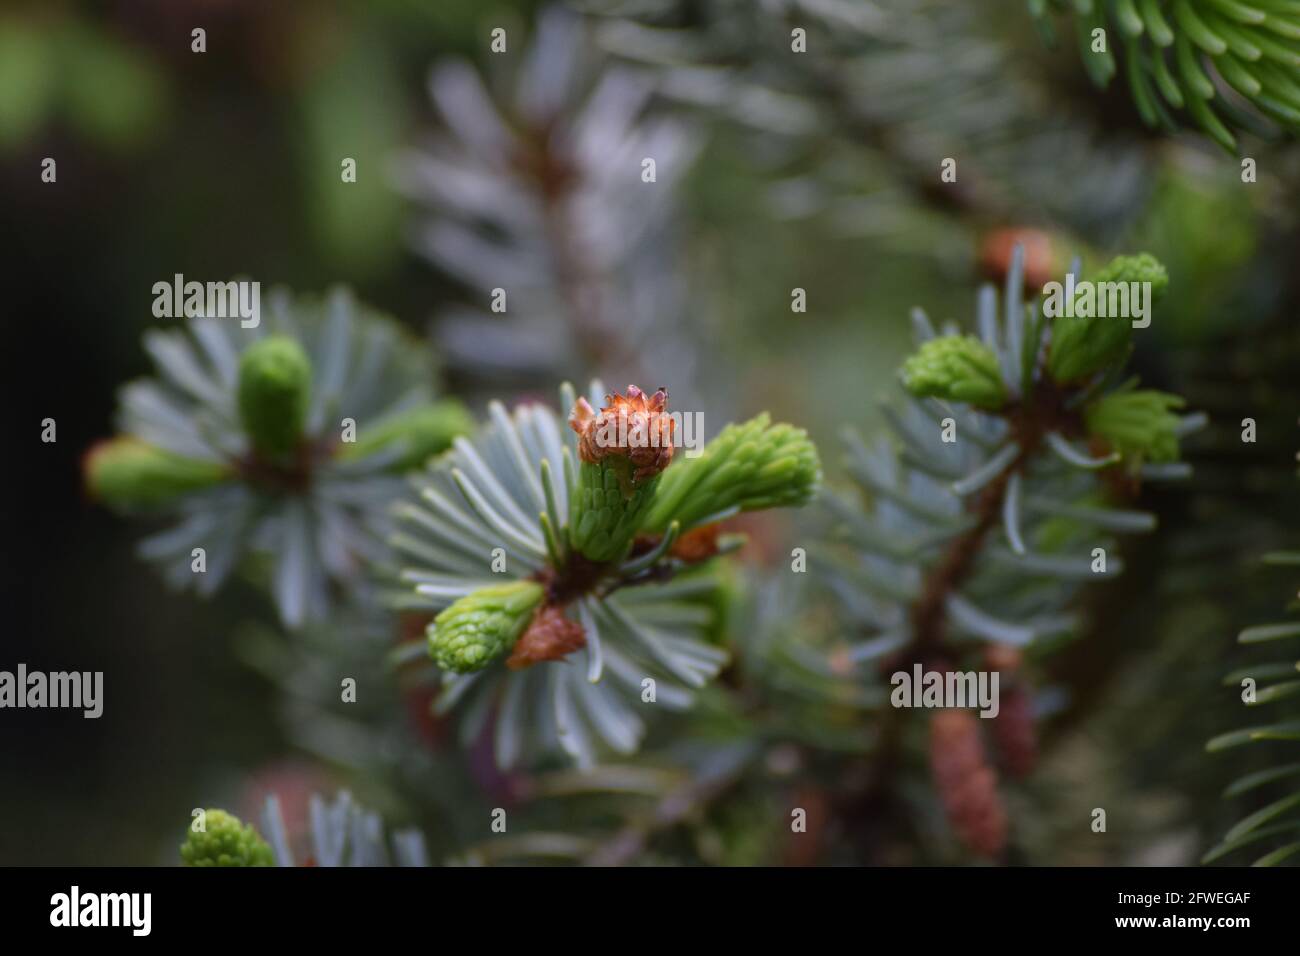 fresh green Tips on a Spruce Stock Photo